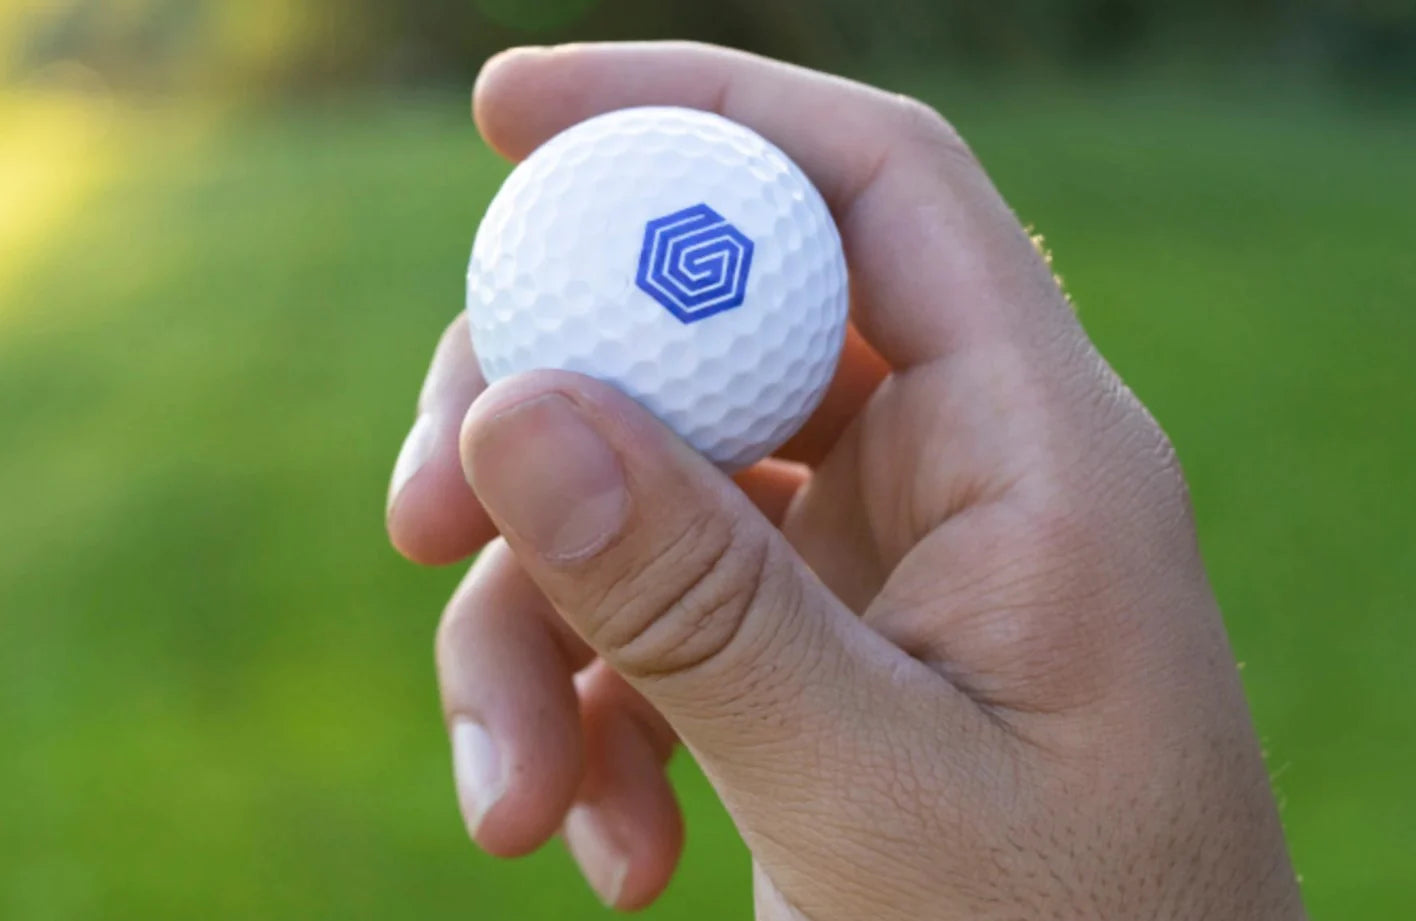 write a blog about The future of golf balls: Smart technology and innovations